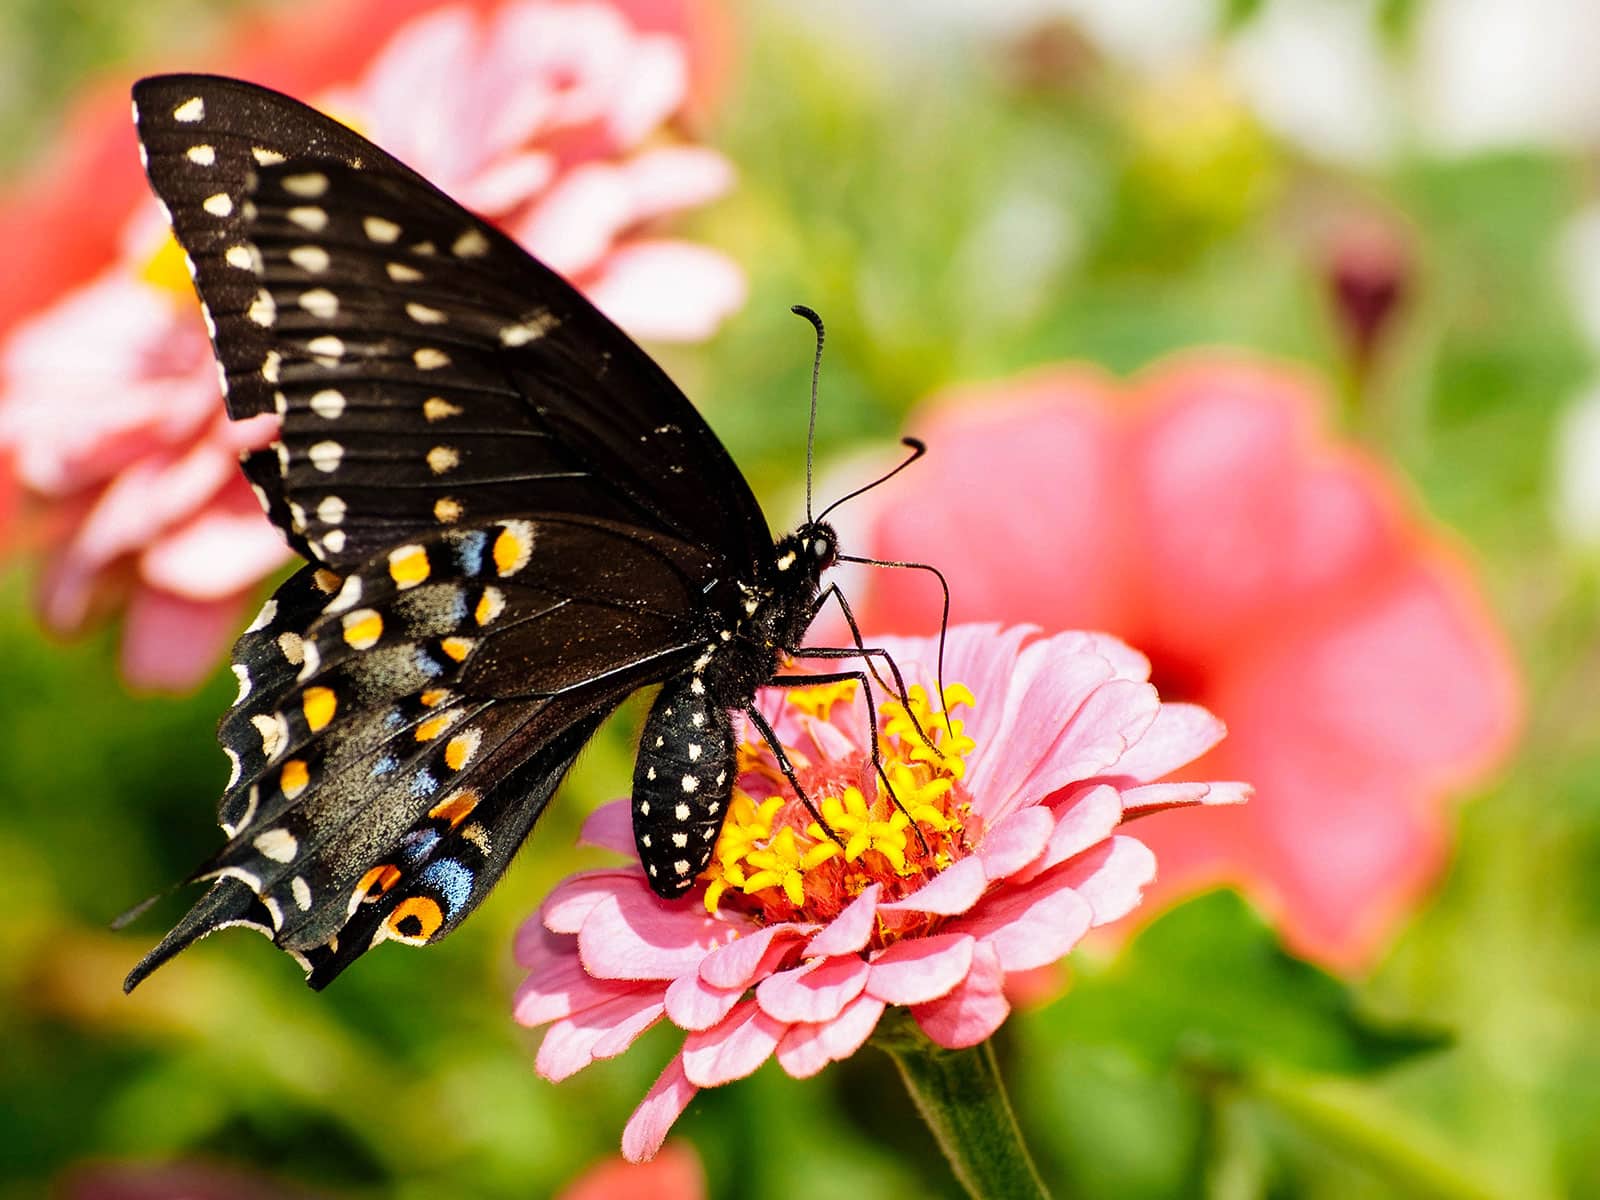 An Eastern black swallowtail butterfly perched on a pink zinnia flower